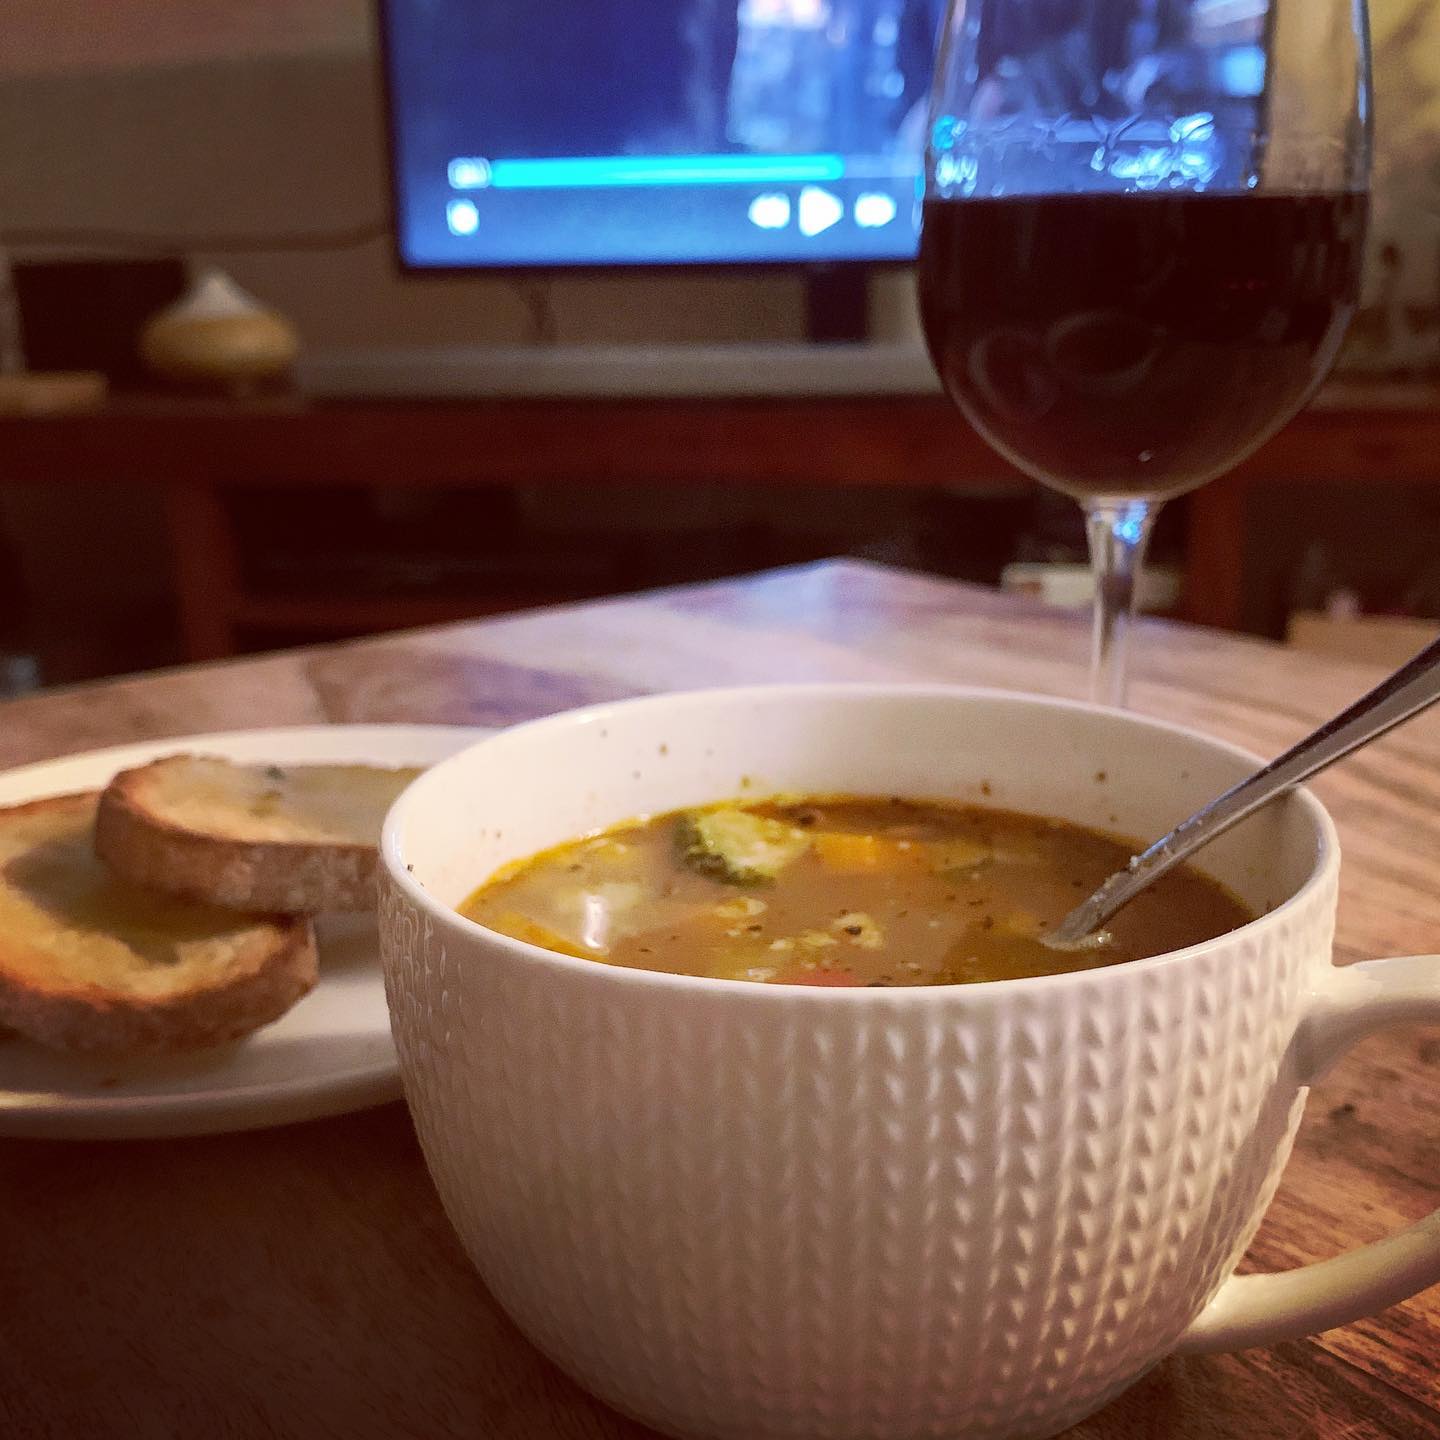 Saturday night feels. Home made veggie and bean soup with home made stock, cooked dried beans, home made tomato sauce from home grown heirloom tomatoes. A couple of slices of toast, glass (or two) of red. And Killing Eve on @abctv IView. After a busy month of March, including a bout of Covid and a couple of trips away, this works for me. 

#soup #homemadesoup #veggiesoup #freshsoup #homemadeisbest #soupandtoast #redwine #redwines #winetime #saturdayvibes #saturdayathome #theinfatuatedfoodie #killingeve #abciview #abctv